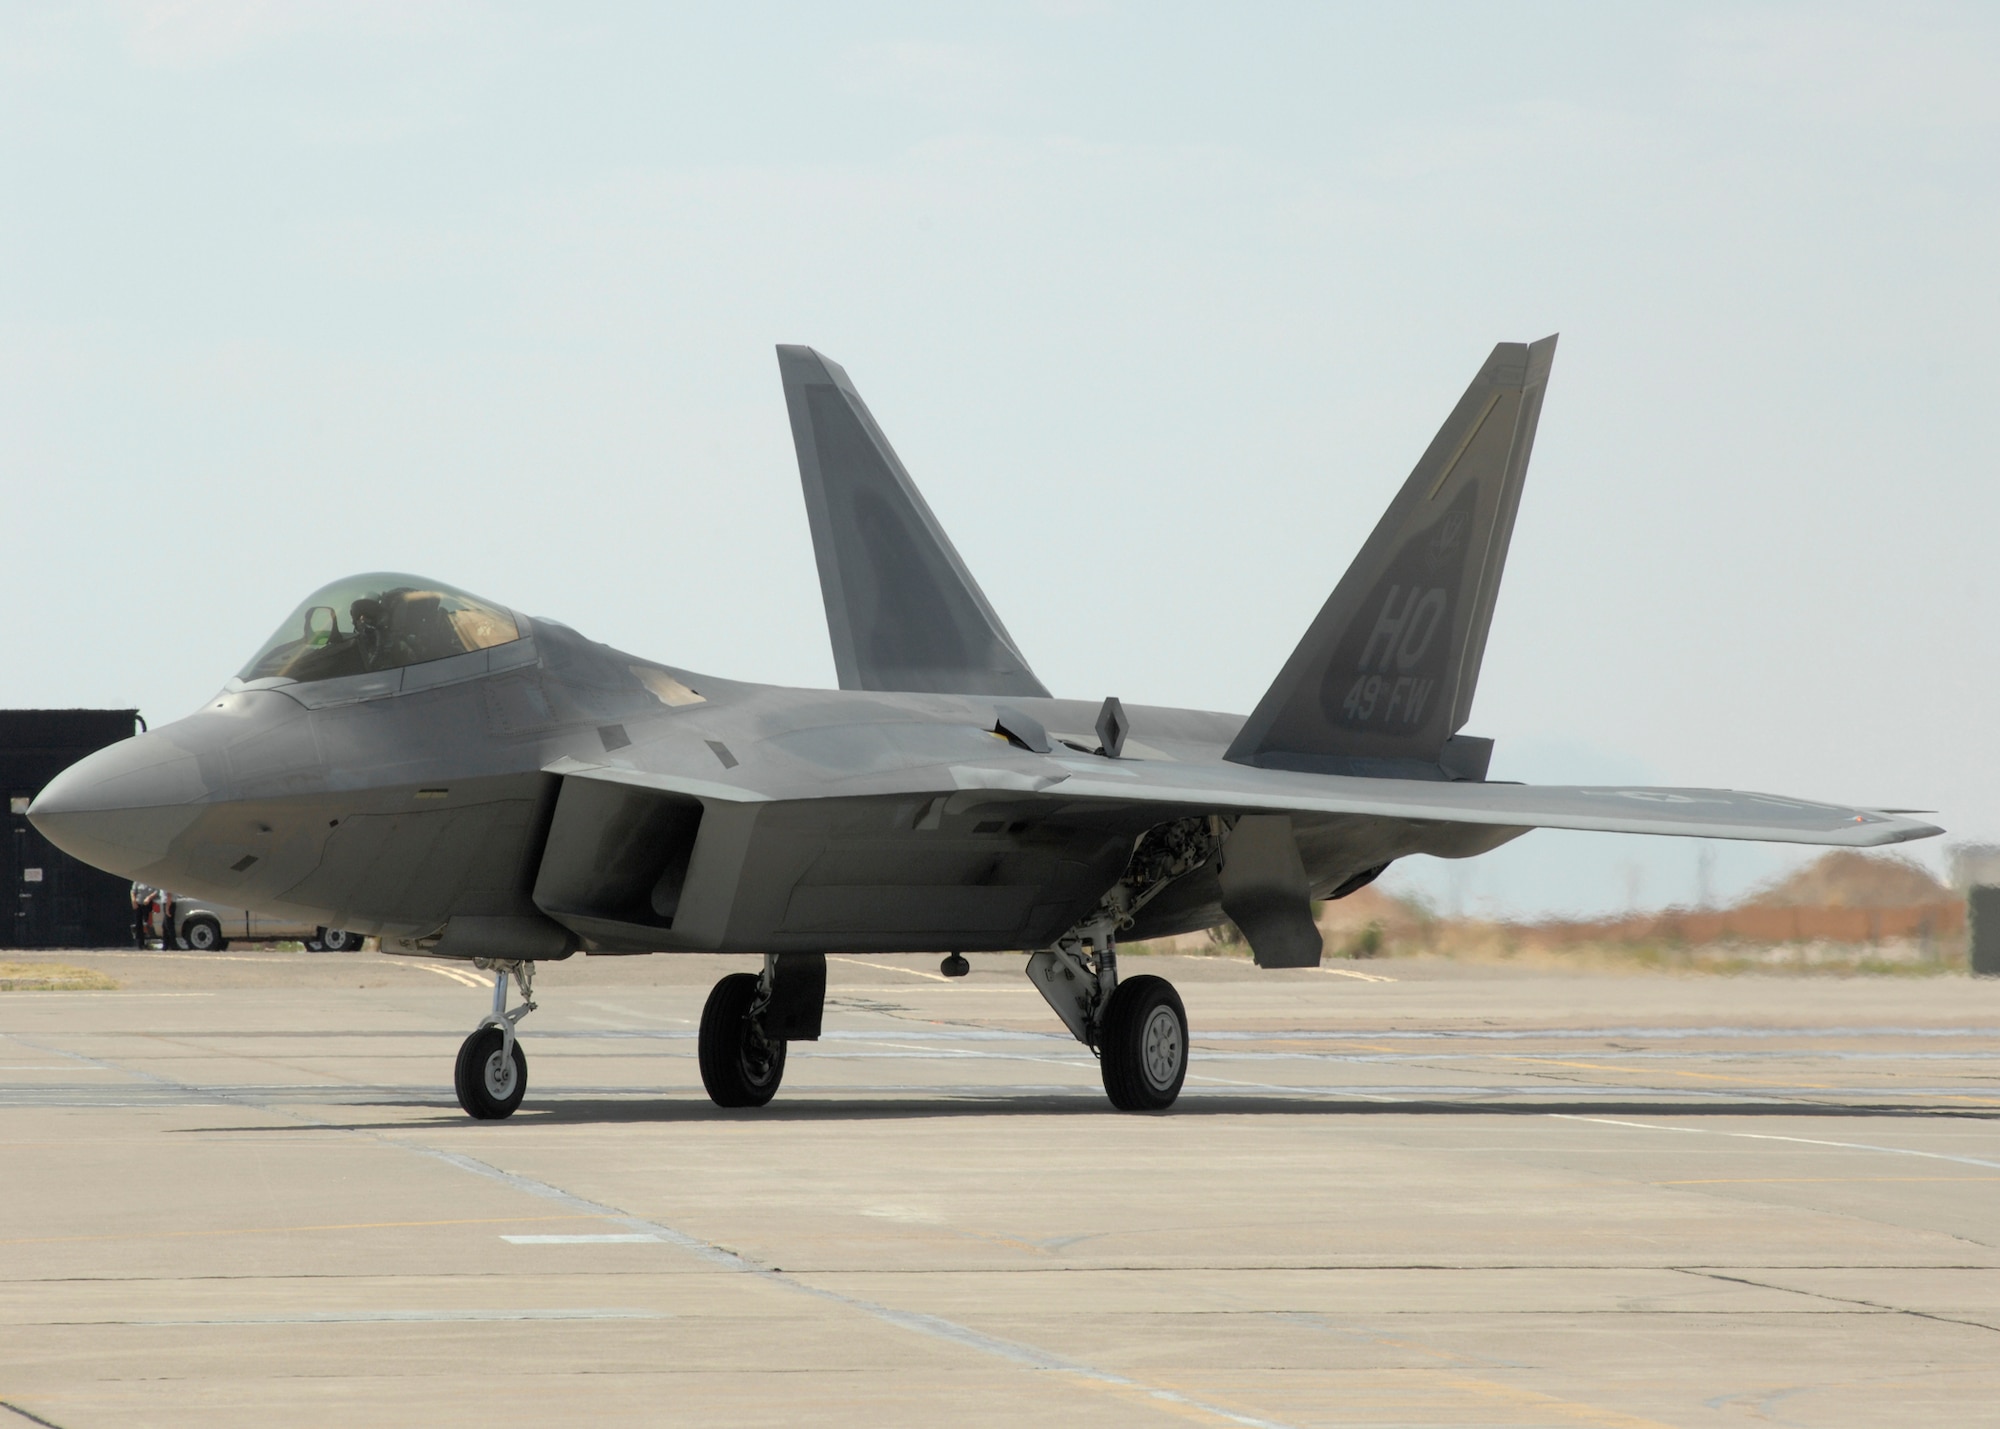 An F-22 Raptor flown by Col. Jeff Harrigian, 49th Fighter Wing commander, arrives on Holloman Air Force Base, N.M., June 2.This is one of the first F-22s assigned to Holloman. (U.S. Air Force photo/Airman 1st Class Rachel A. Kocin)